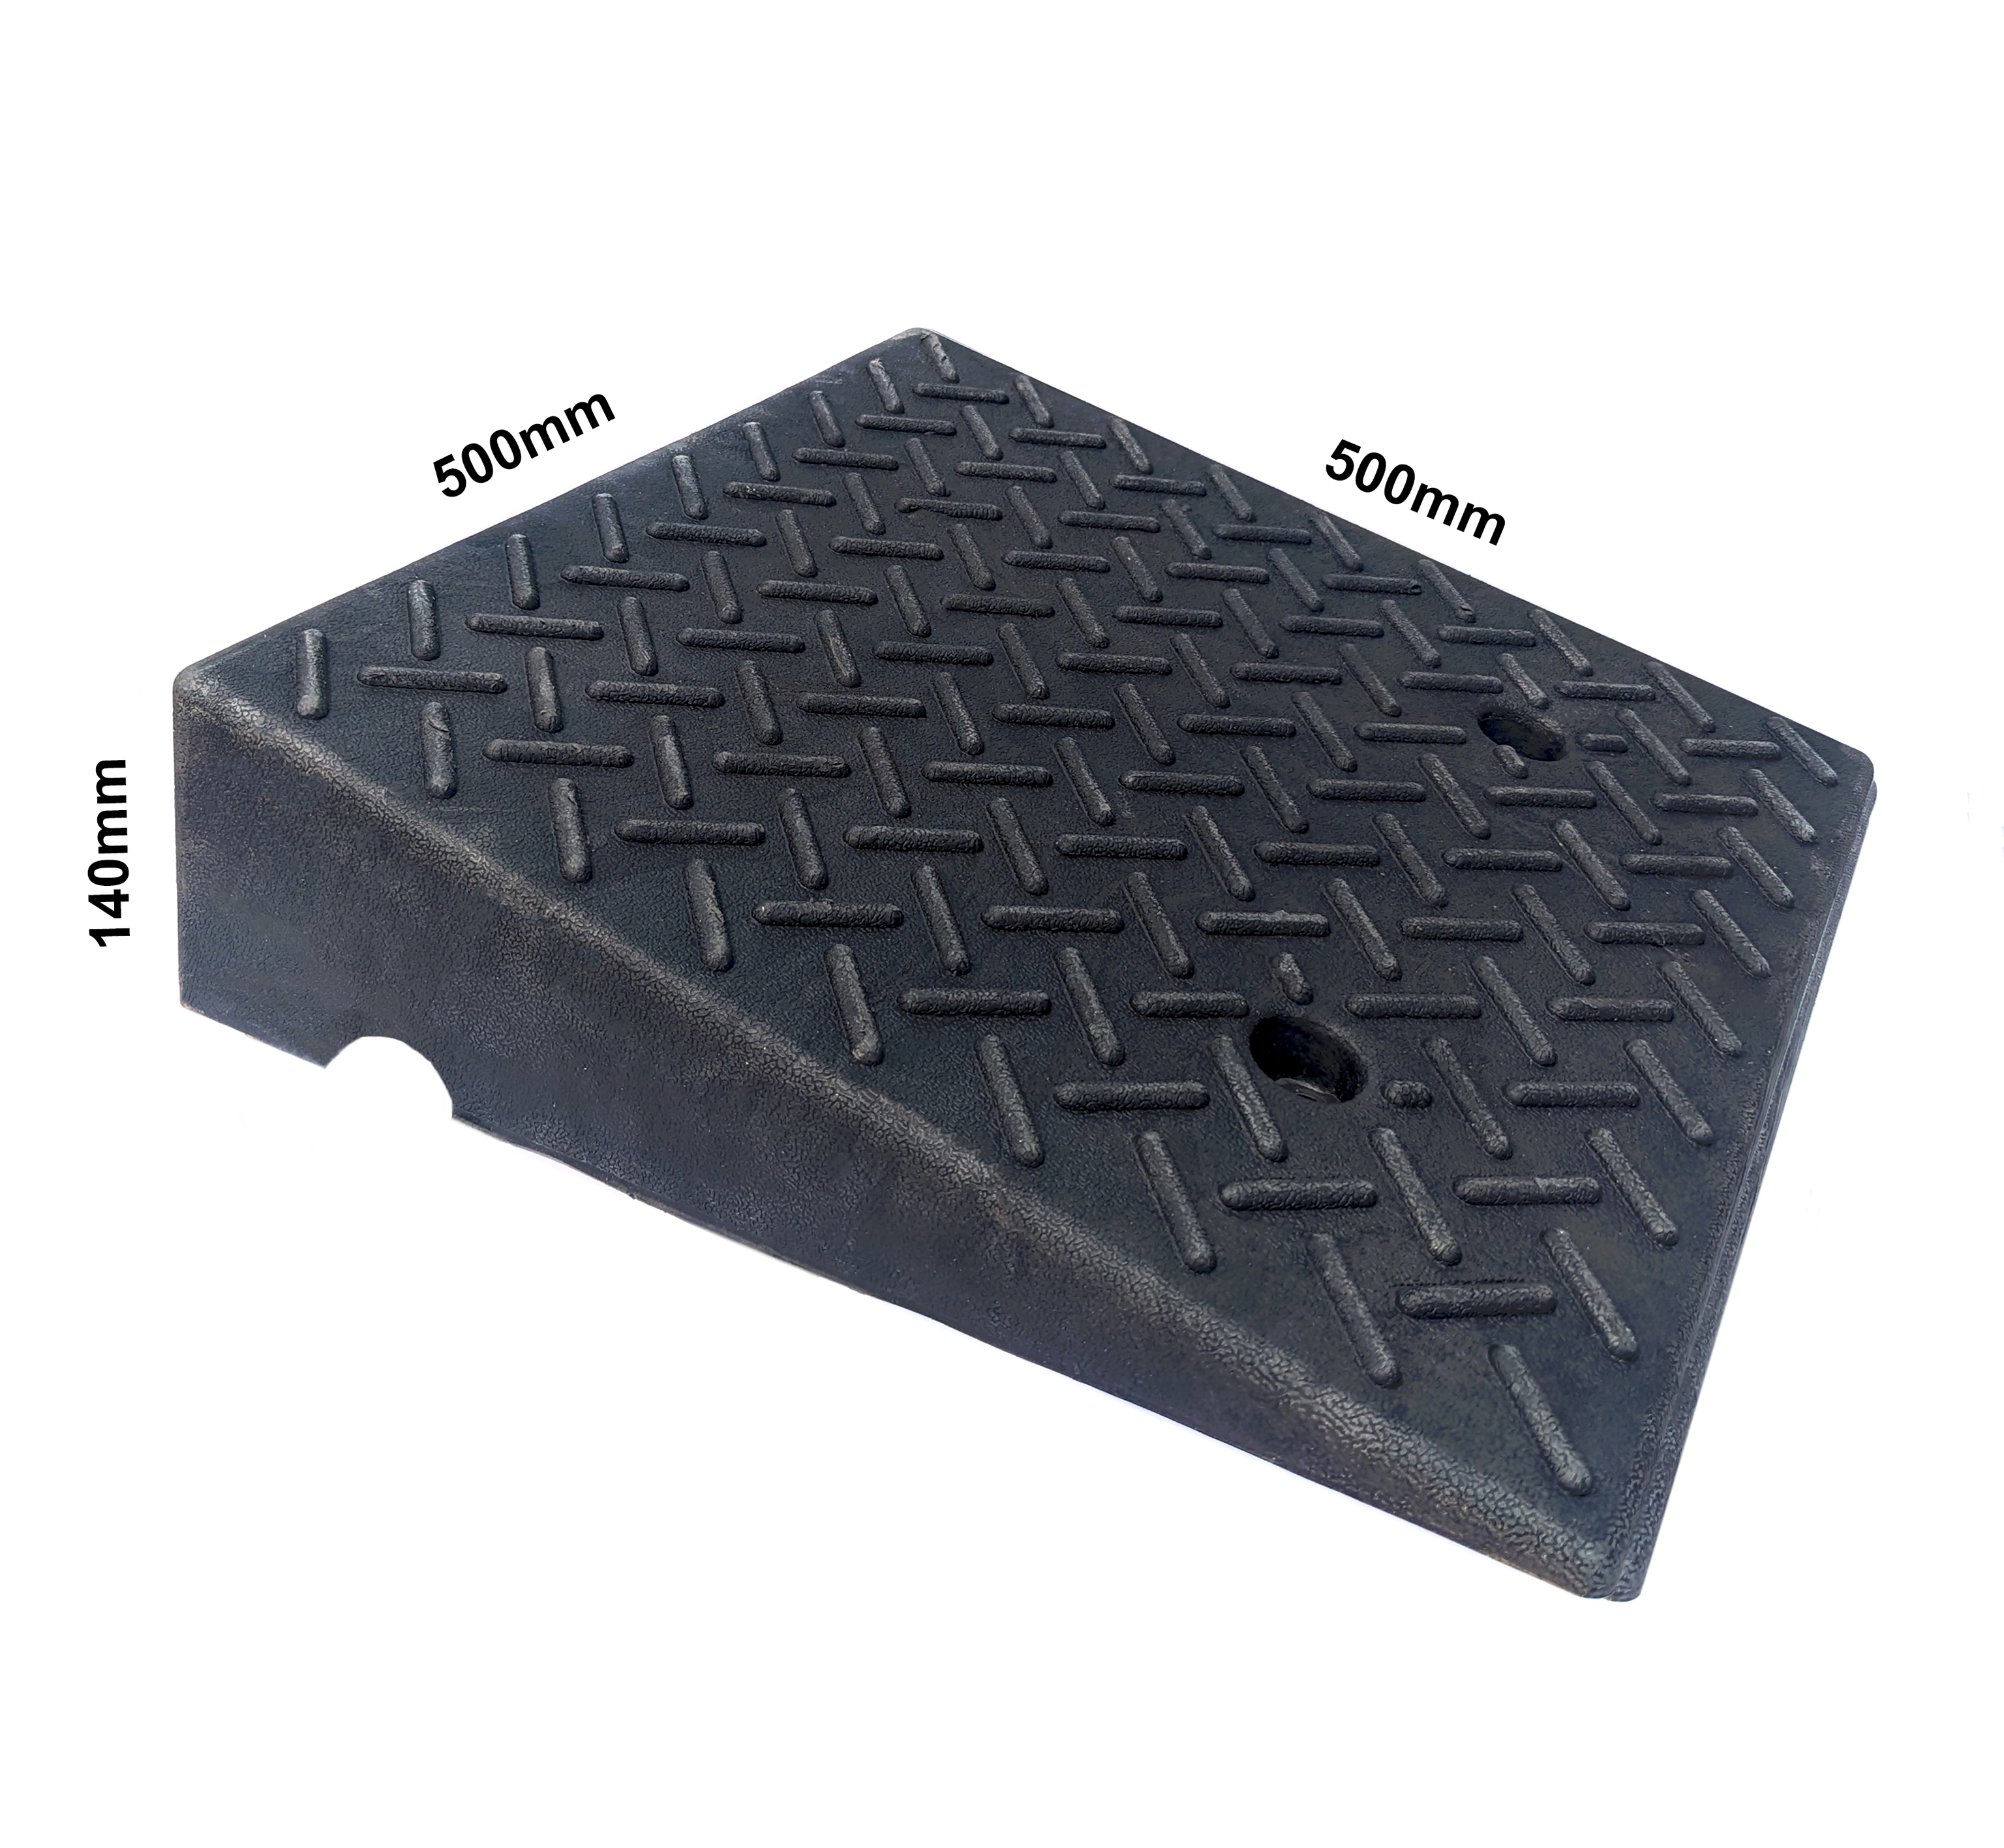 Light Duty Rubber Ramps For Shipping Containers/Sea Cans (2 Pack)